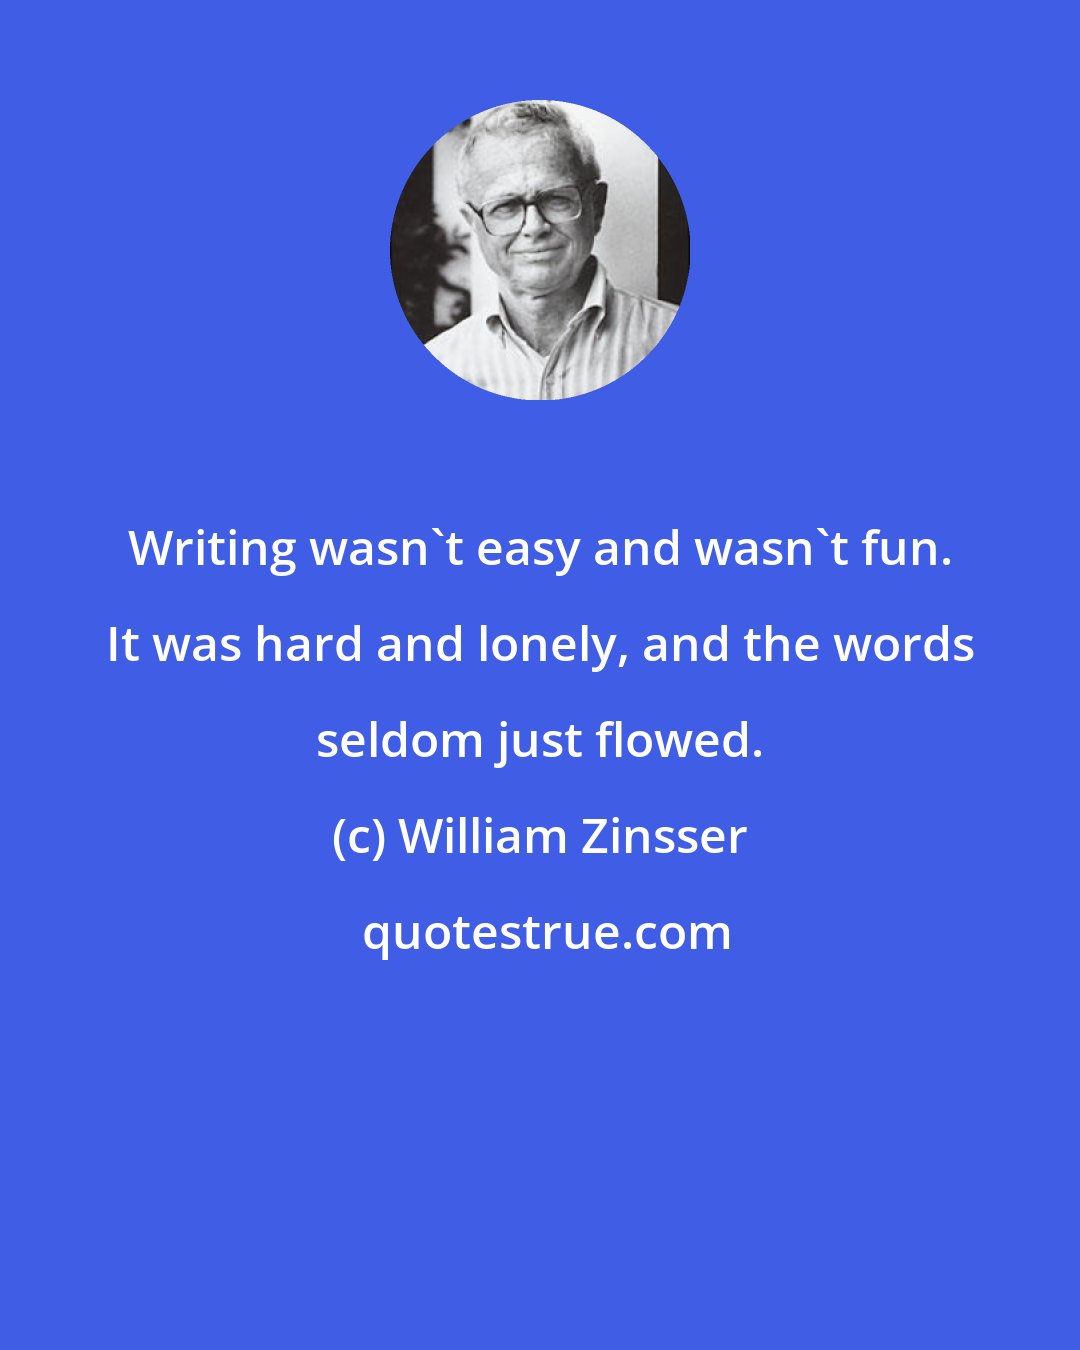 William Zinsser: Writing wasn't easy and wasn't fun. It was hard and lonely, and the words seldom just flowed.